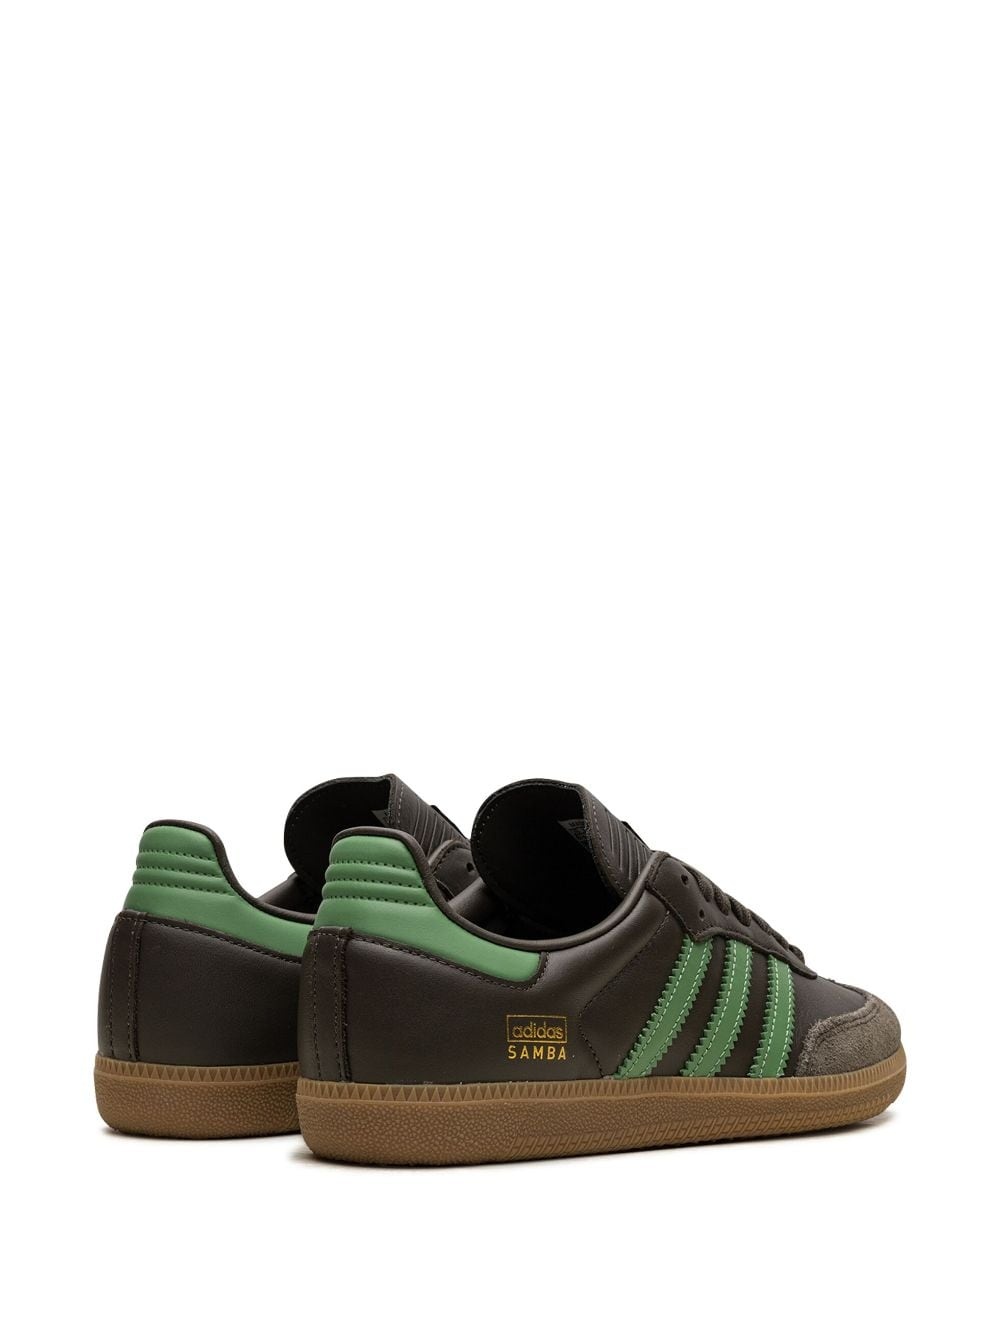 5 "Green and Brown" sneakers - 3